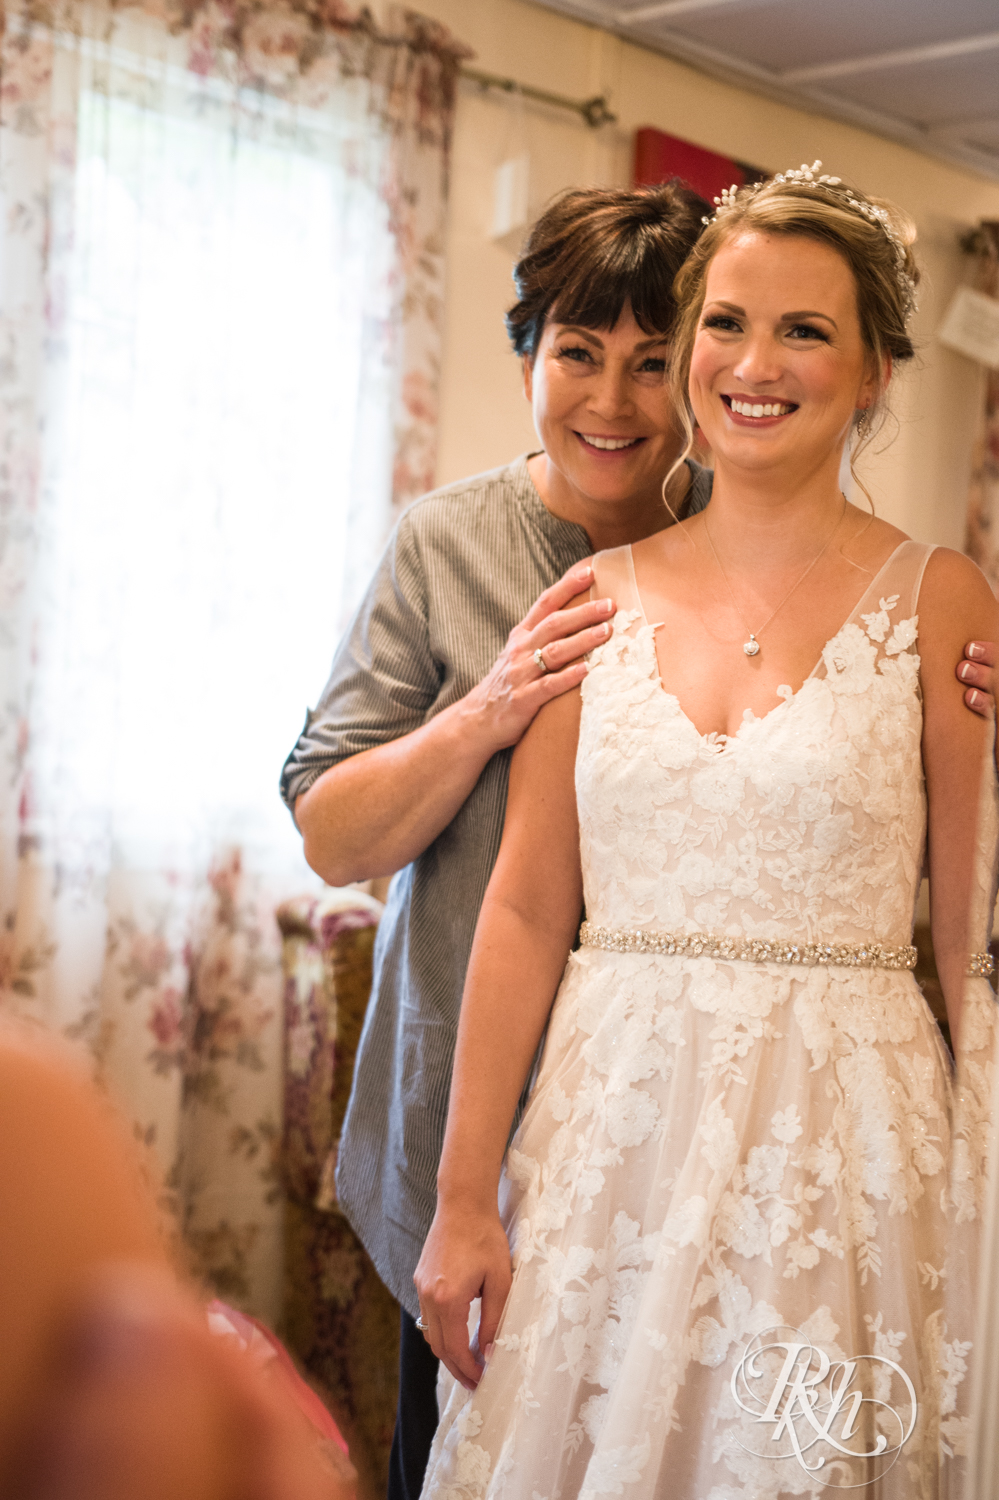 Bride getting zipped into dress by mom before wedding at Camrose Hill Flower Farm in Stillwater, Minnesota.